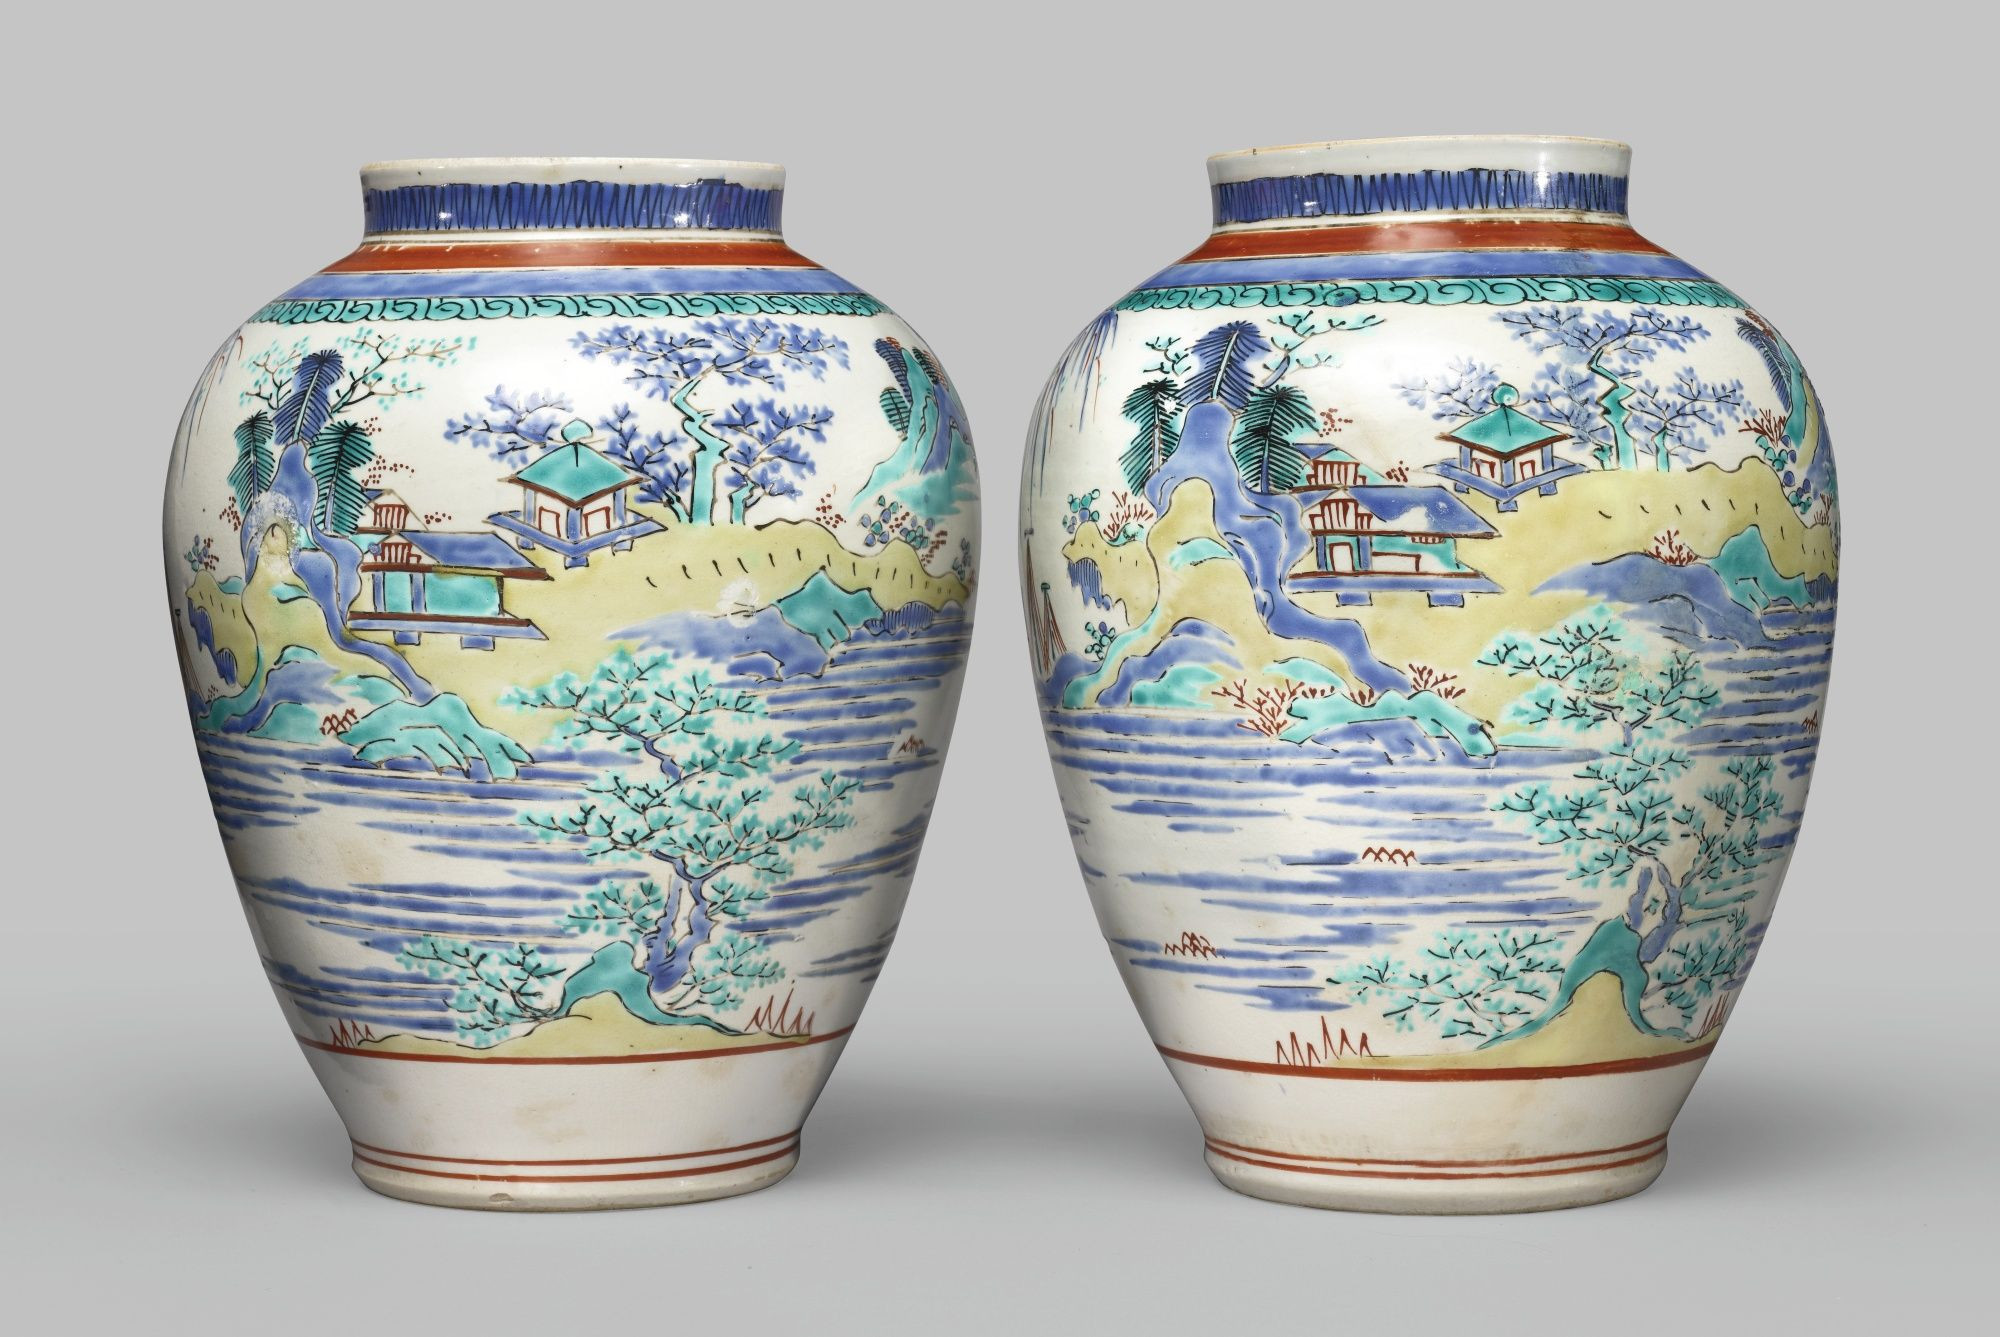 12 Fantastic Large Japanese Vase 2024 free download large japanese vase of a pair of large kakiemon vases japan late 17th century each of regarding a pair of large kakiemon vases japan late 17th century each of ovoid form decorated in overgla